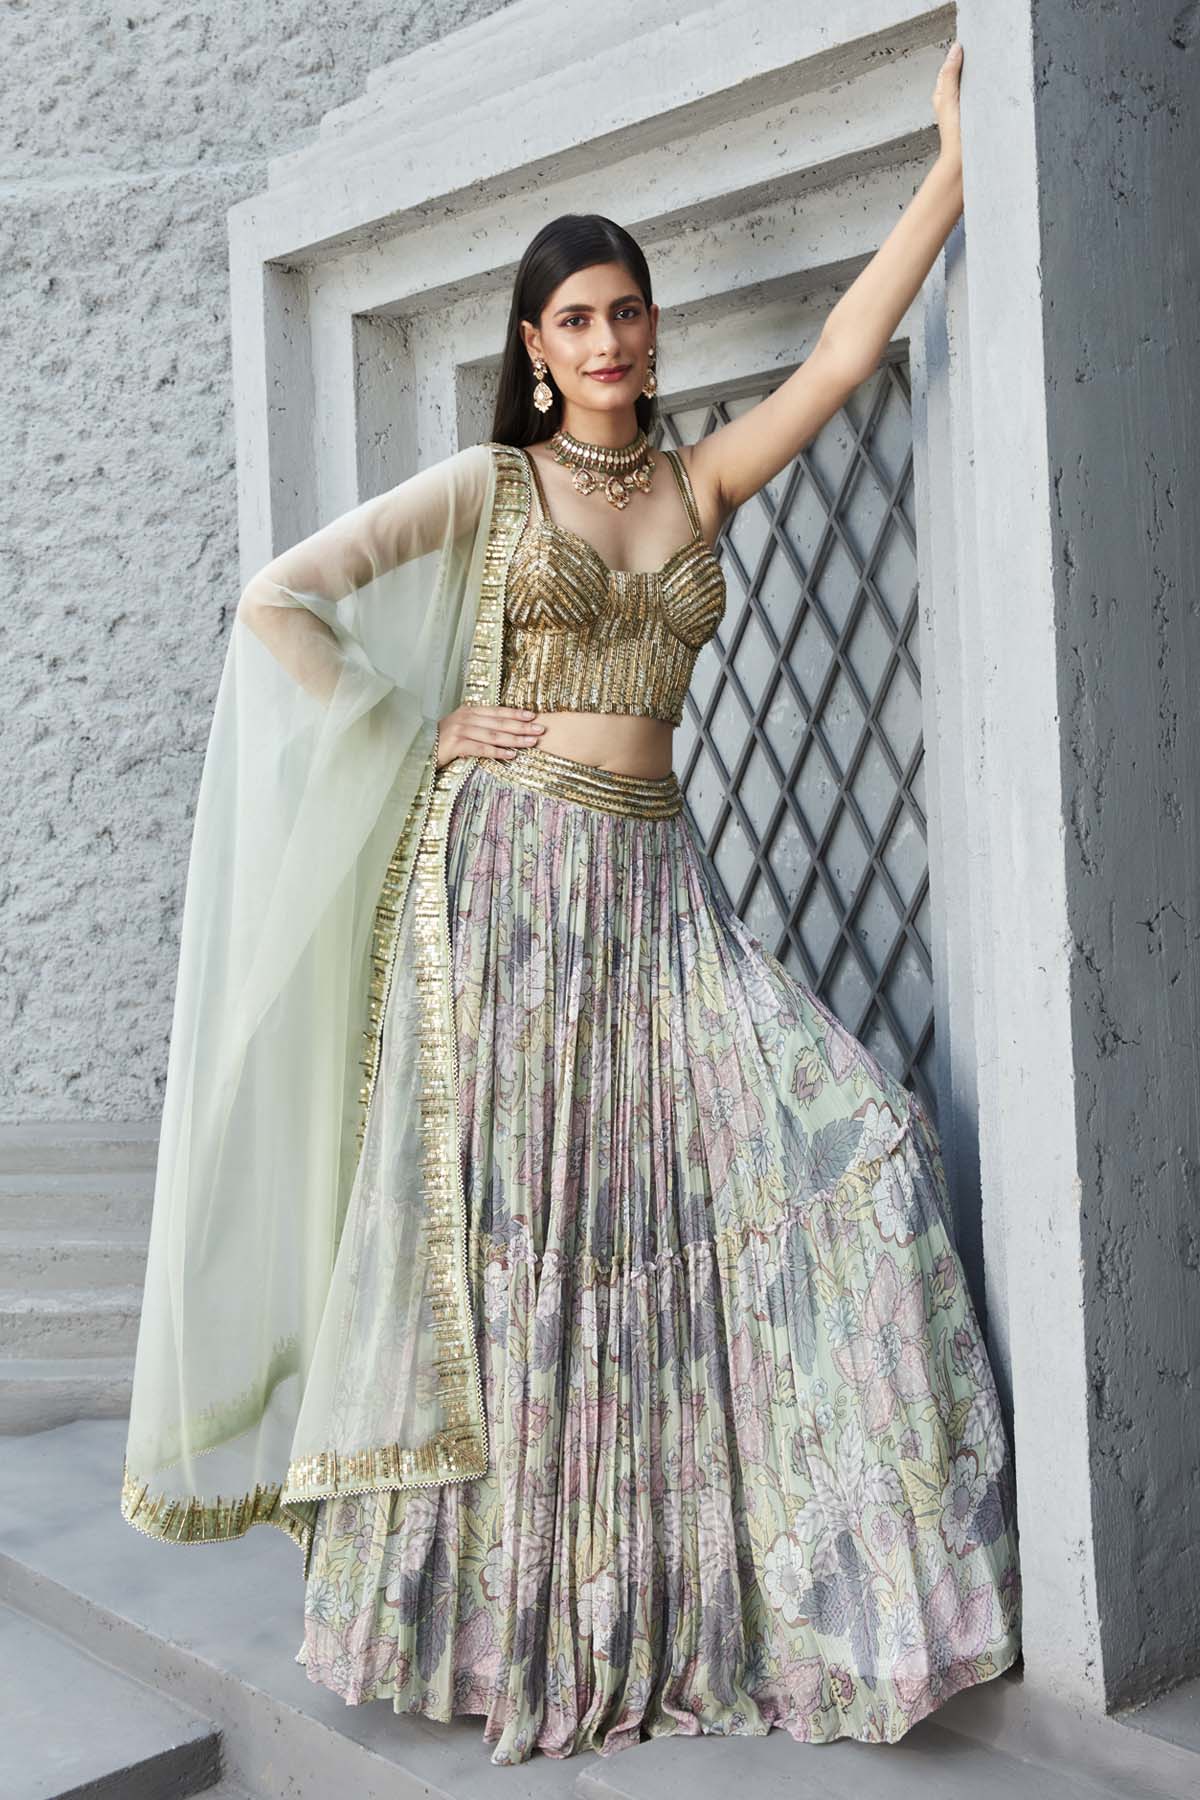 Designer Ranian Fern green lehenga set with georgette printed 2 tier lehenga with can can, heavy embroidered corset blouse with side zip and organza dupatta For women Online at ScrollnShops